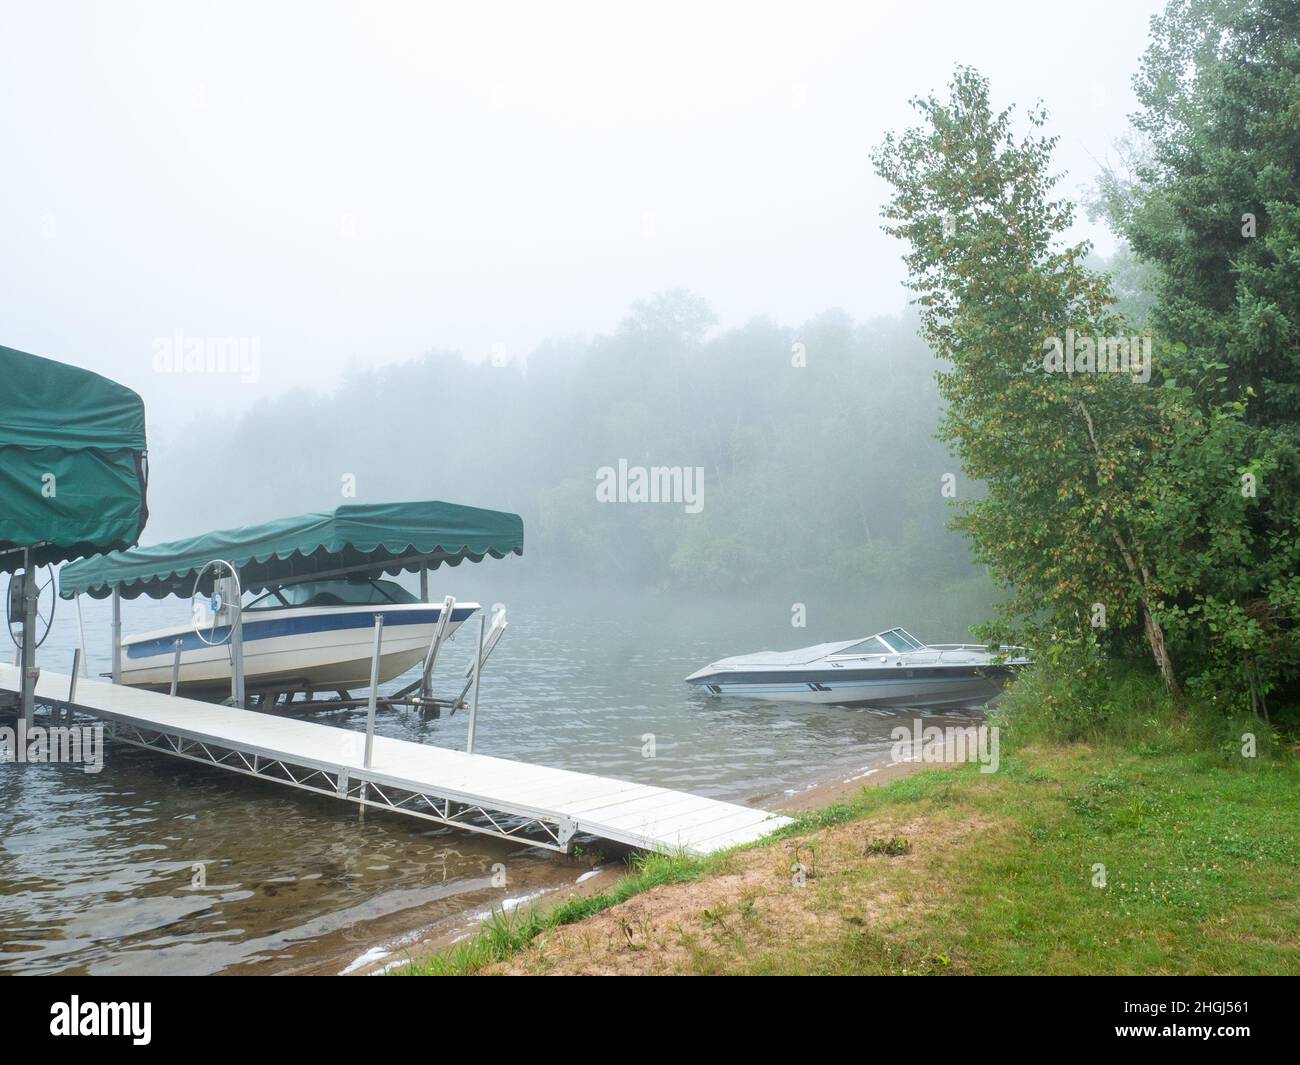 Beautiful Minnesota lake scene on a foggy morning with calm waters and a couple pleasure boats on shore. Stock Photo